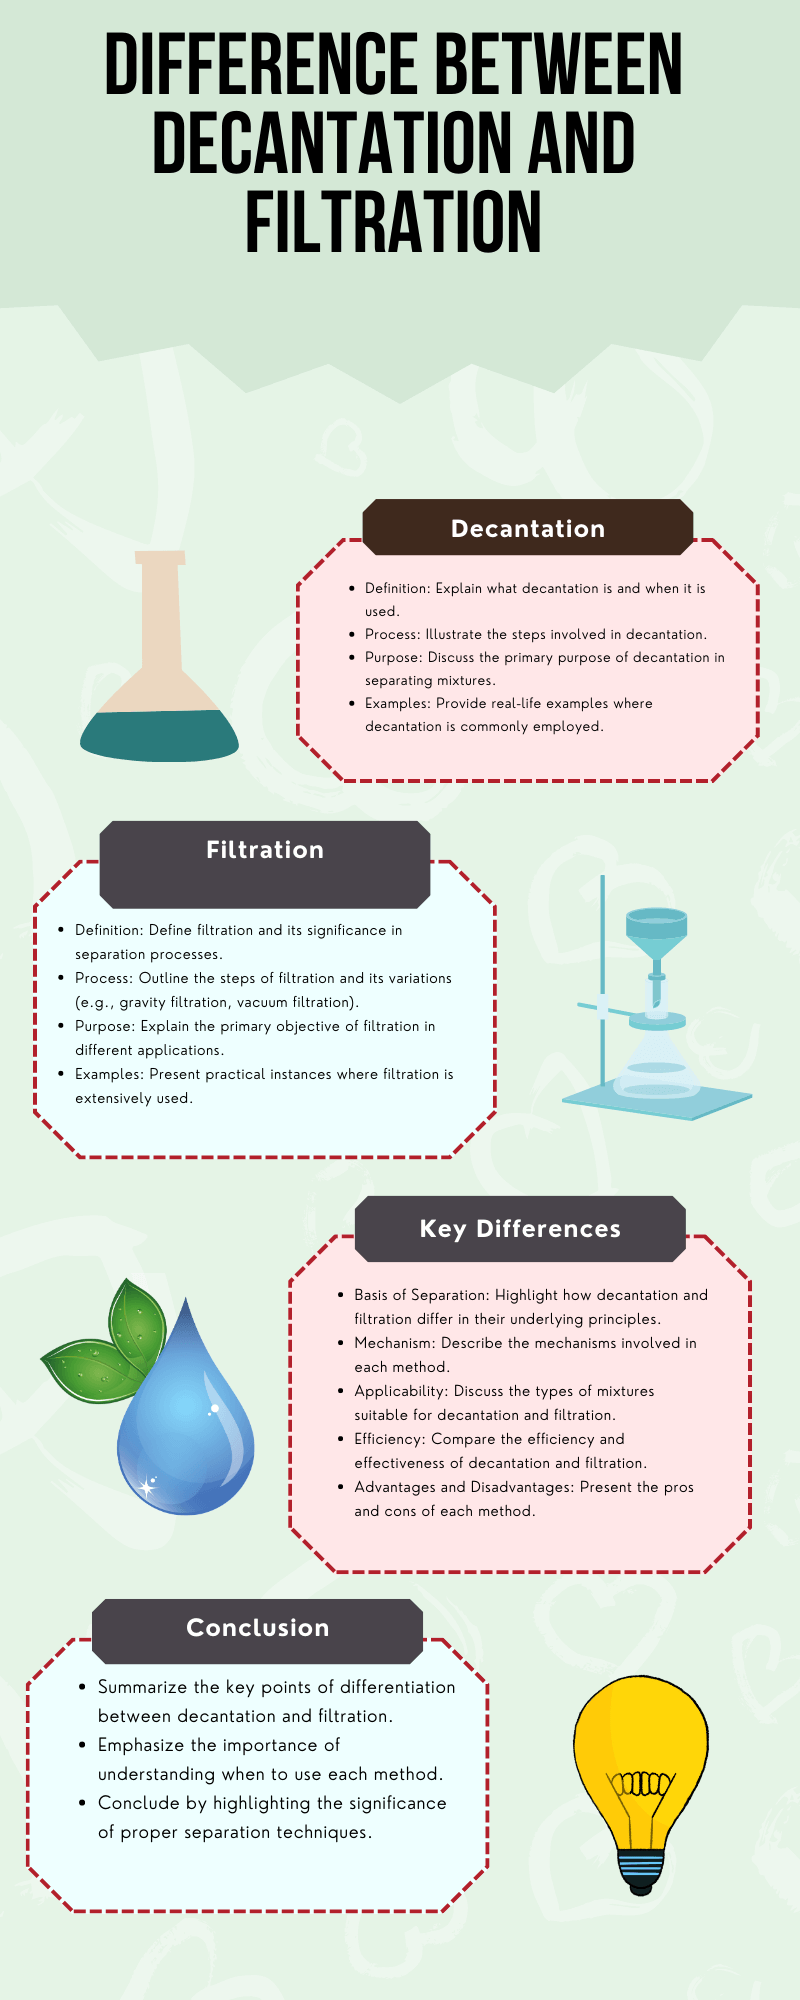 Difference Between Decantation And Filtration - infographic